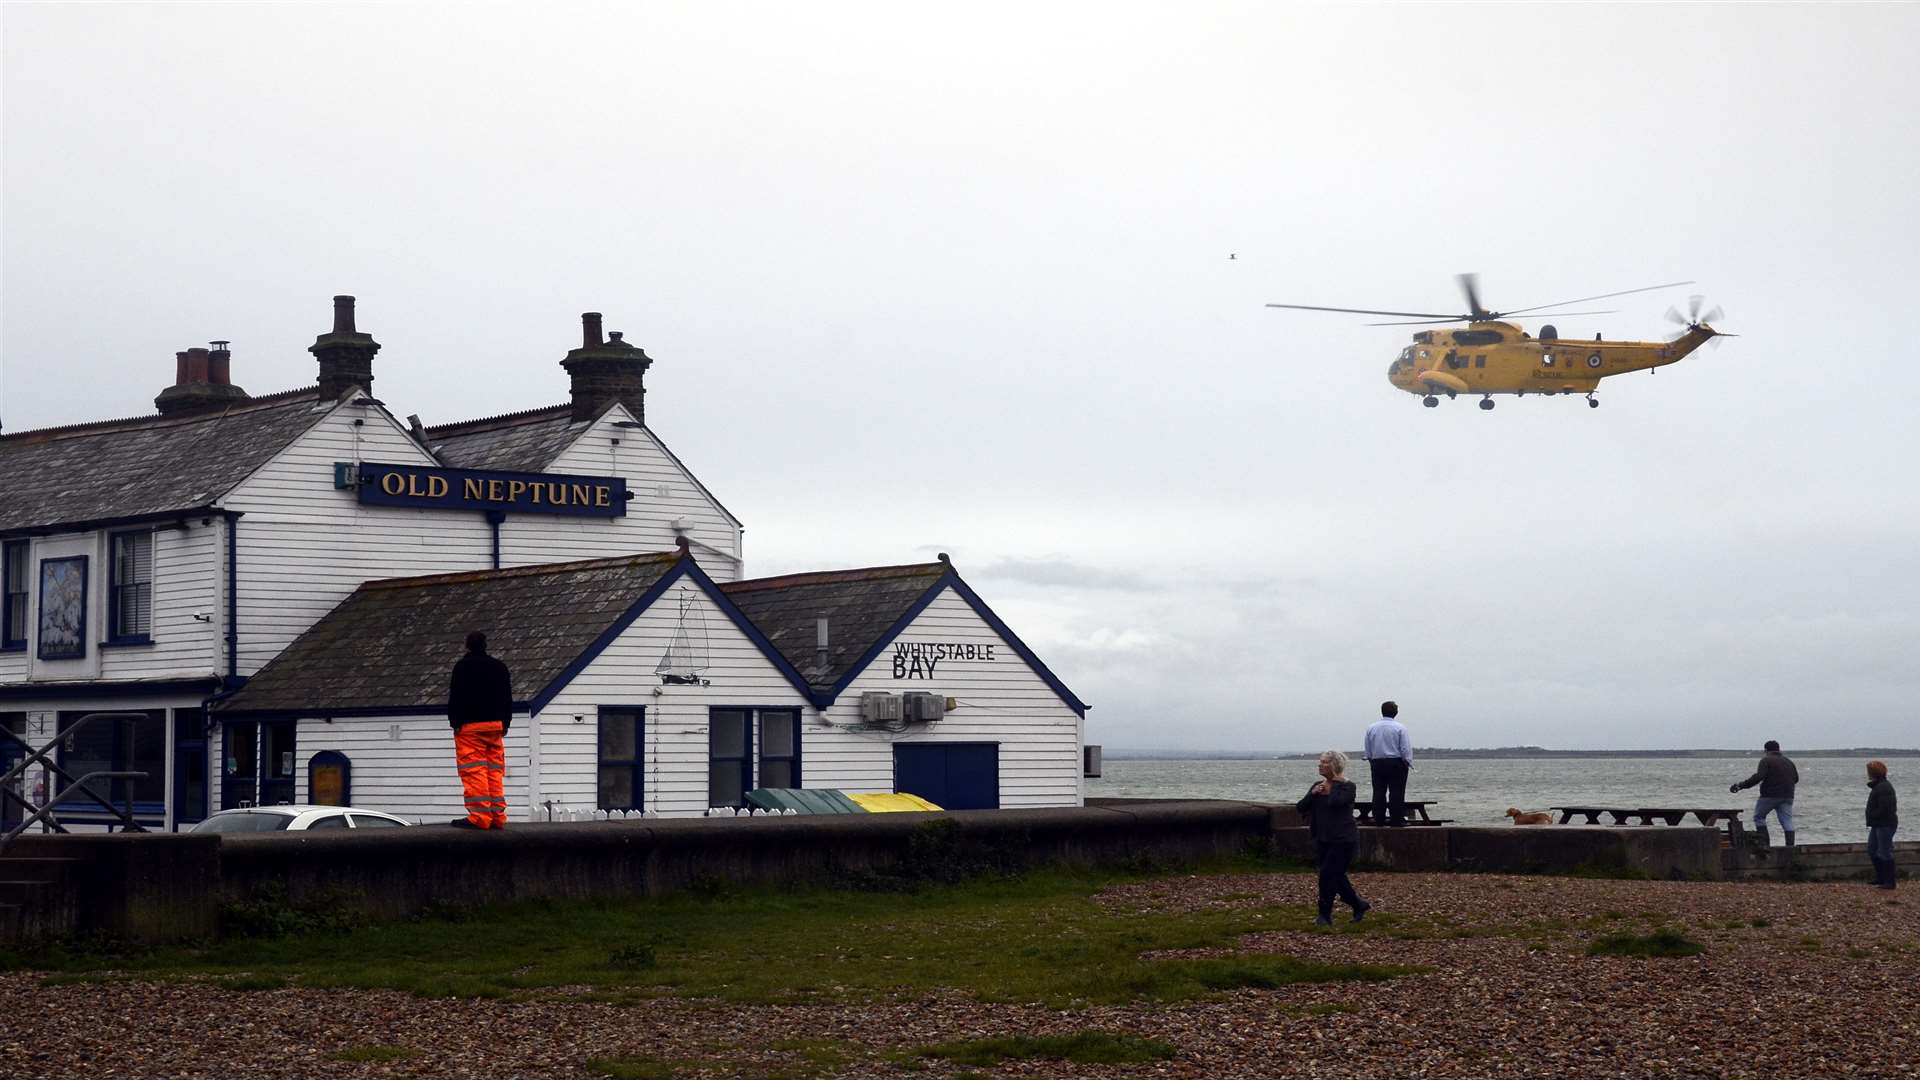 The RAF Sea King helicopter searching near the Old Neptune pub in Whitstable. Picture: Chris Davey